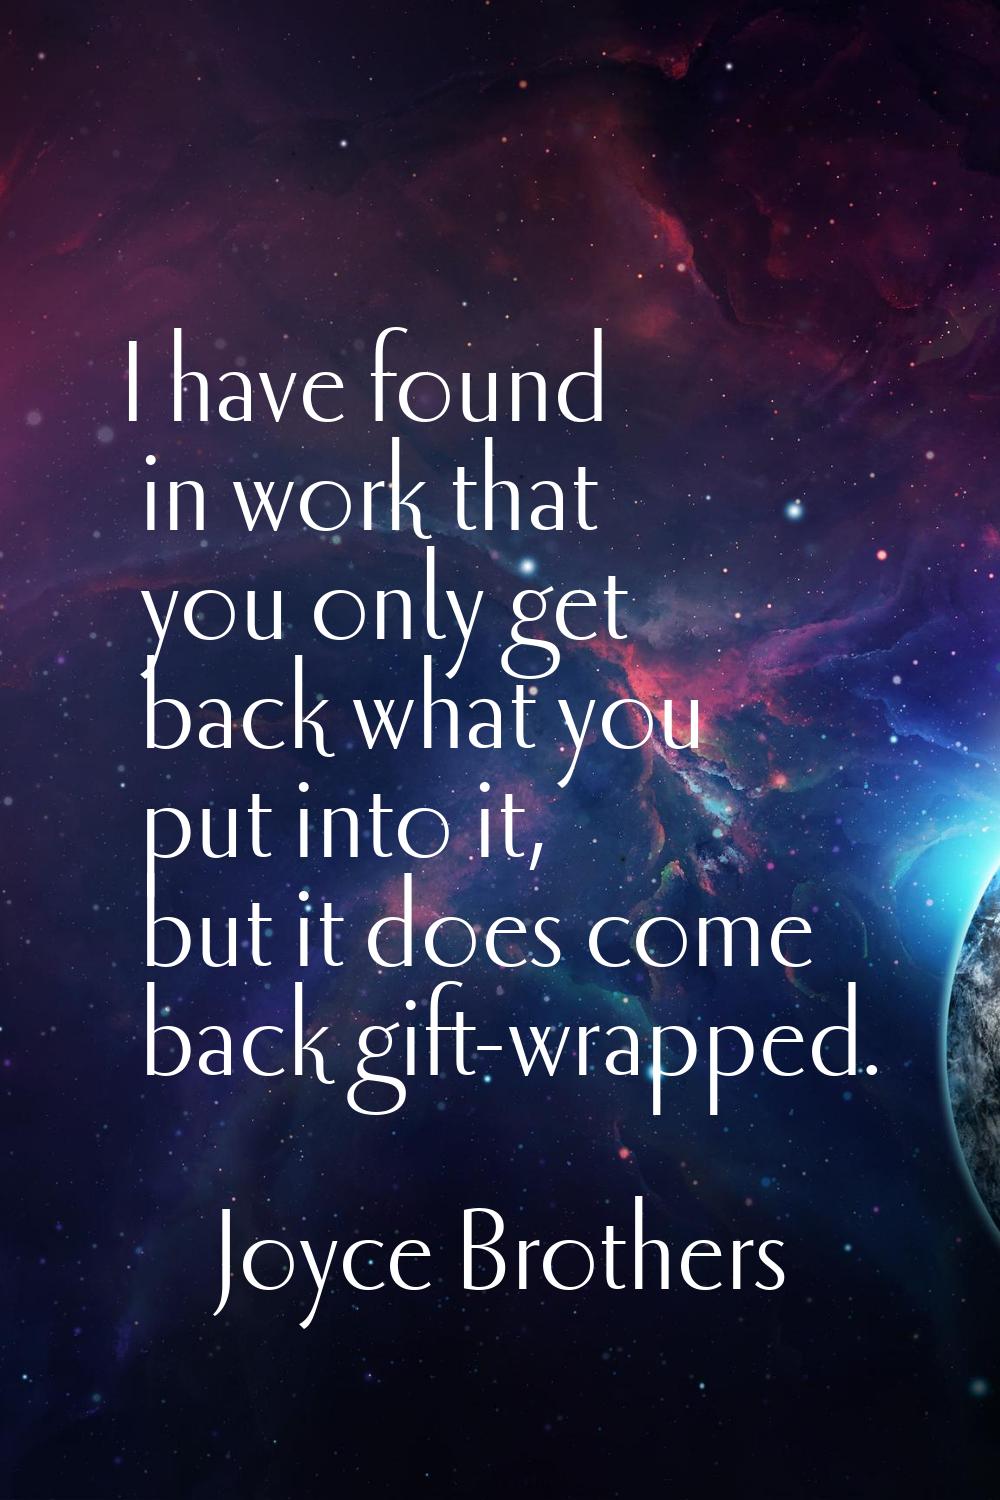 I have found in work that you only get back what you put into it, but it does come back gift-wrappe